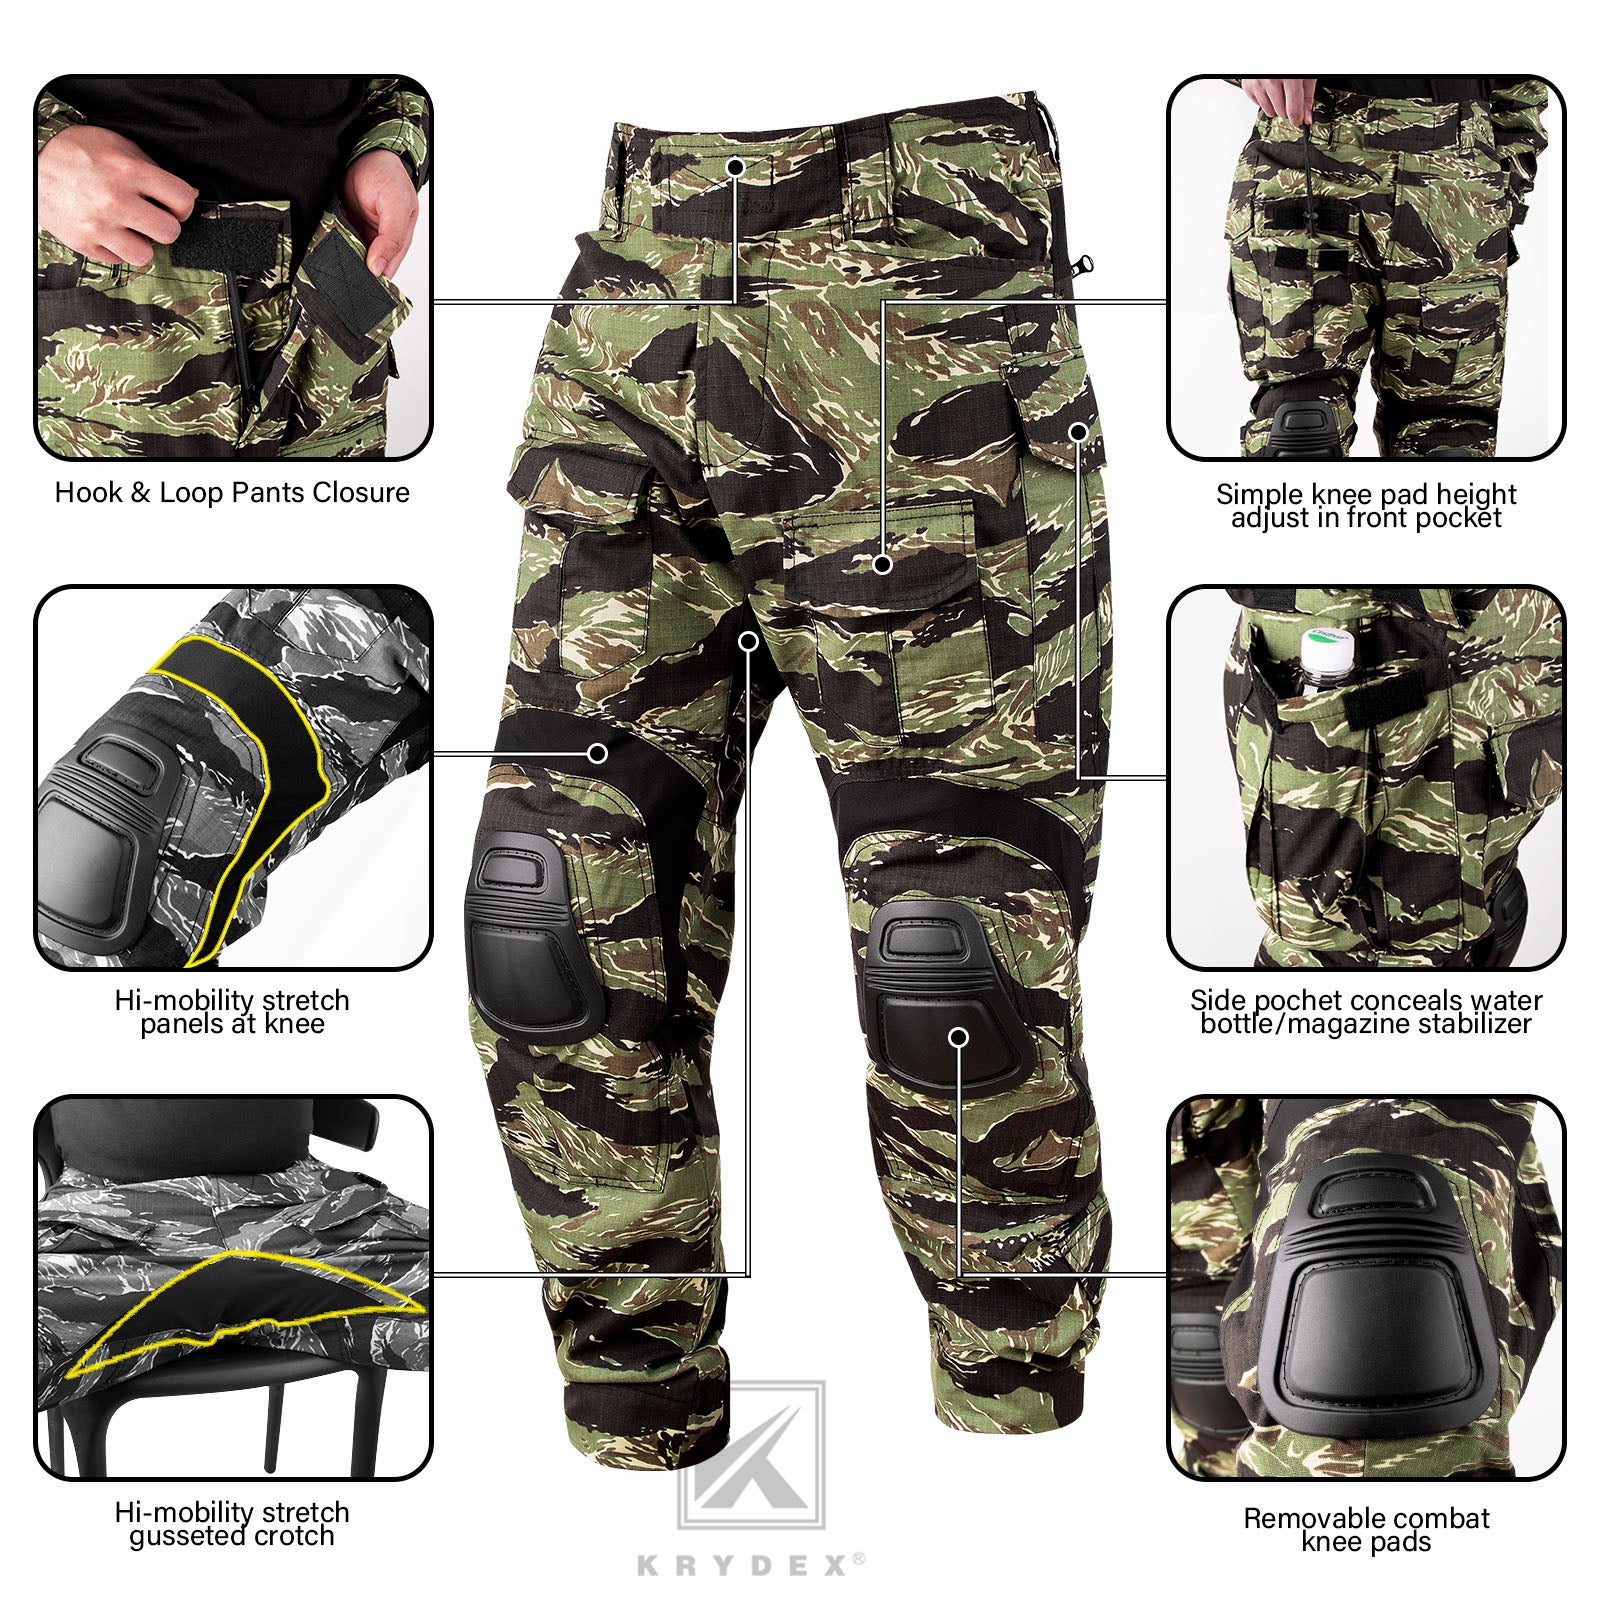 MR HLD Emersongear G2 Tactical Pants With Knee Pads Airsoft Emerson gen2  Combat Training Military Trousers EM7038   AliExpress Mobile